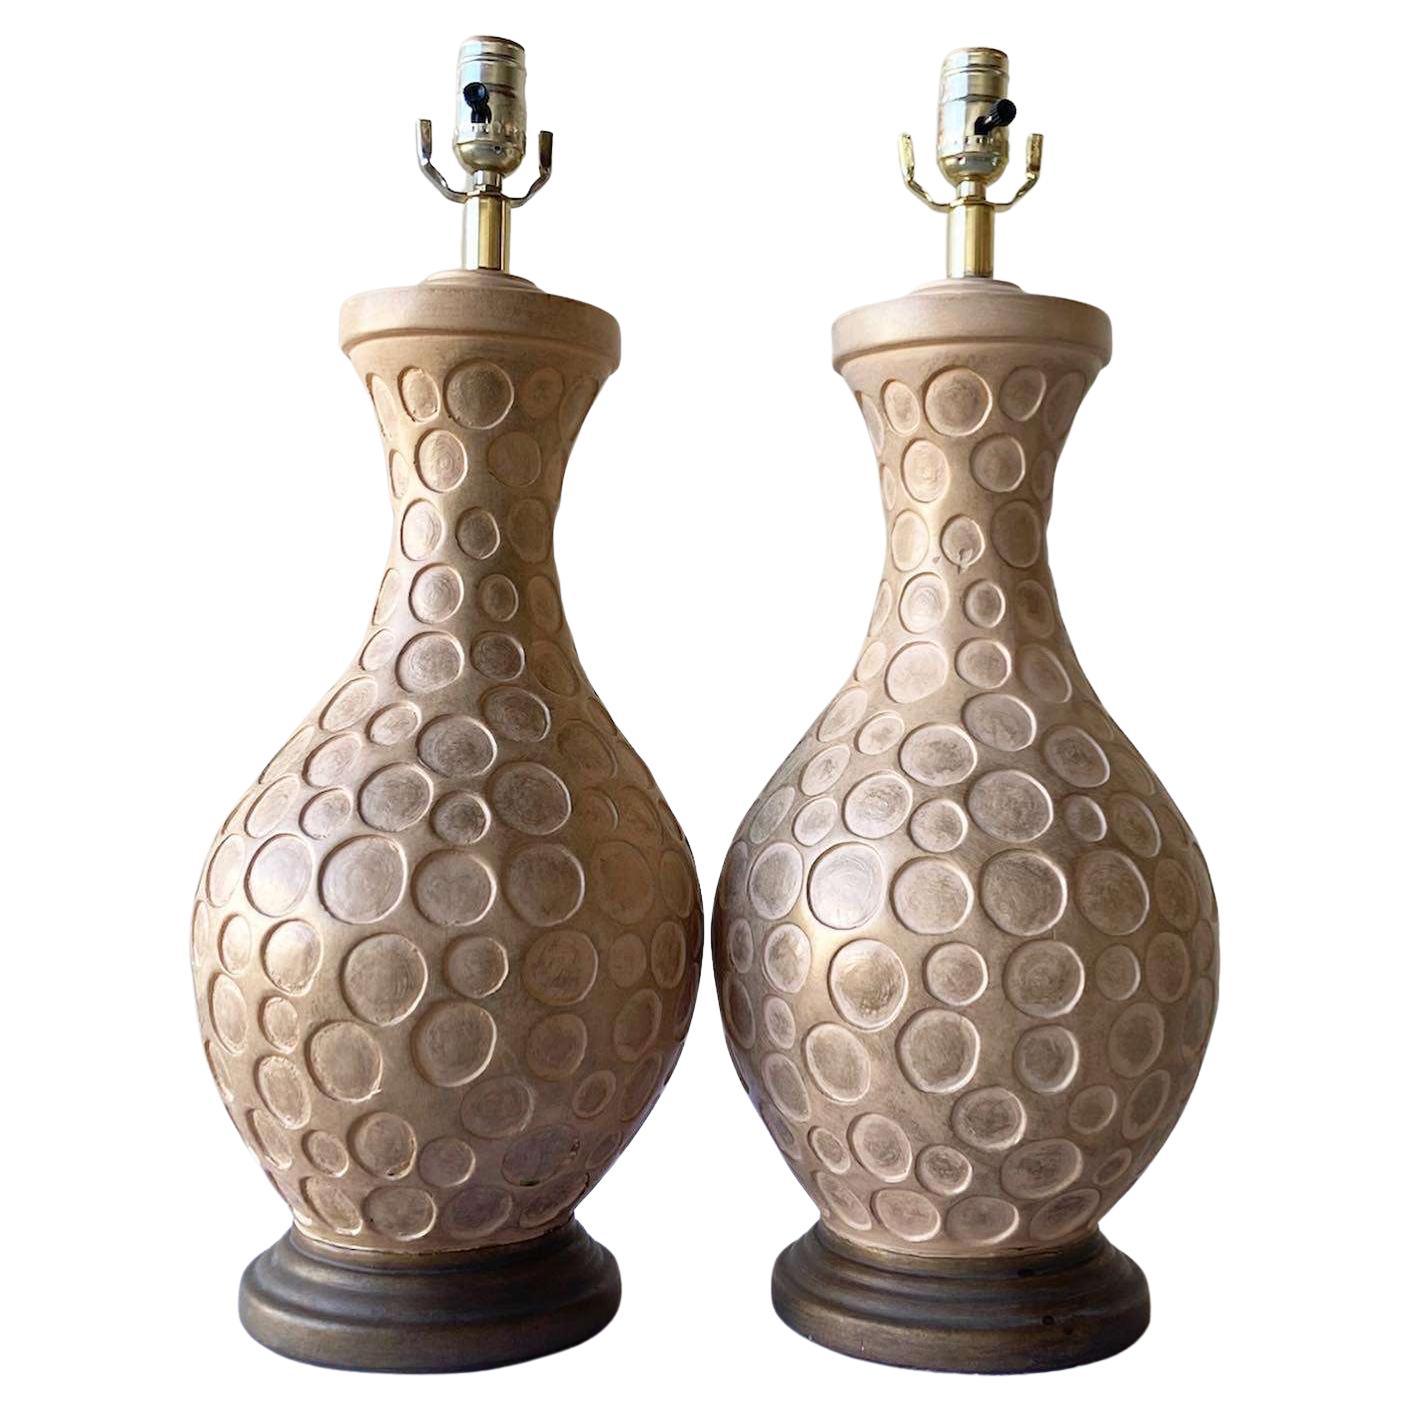 Postmodern Tan Ceramic Table Lamps on Wood Bases - a Pair